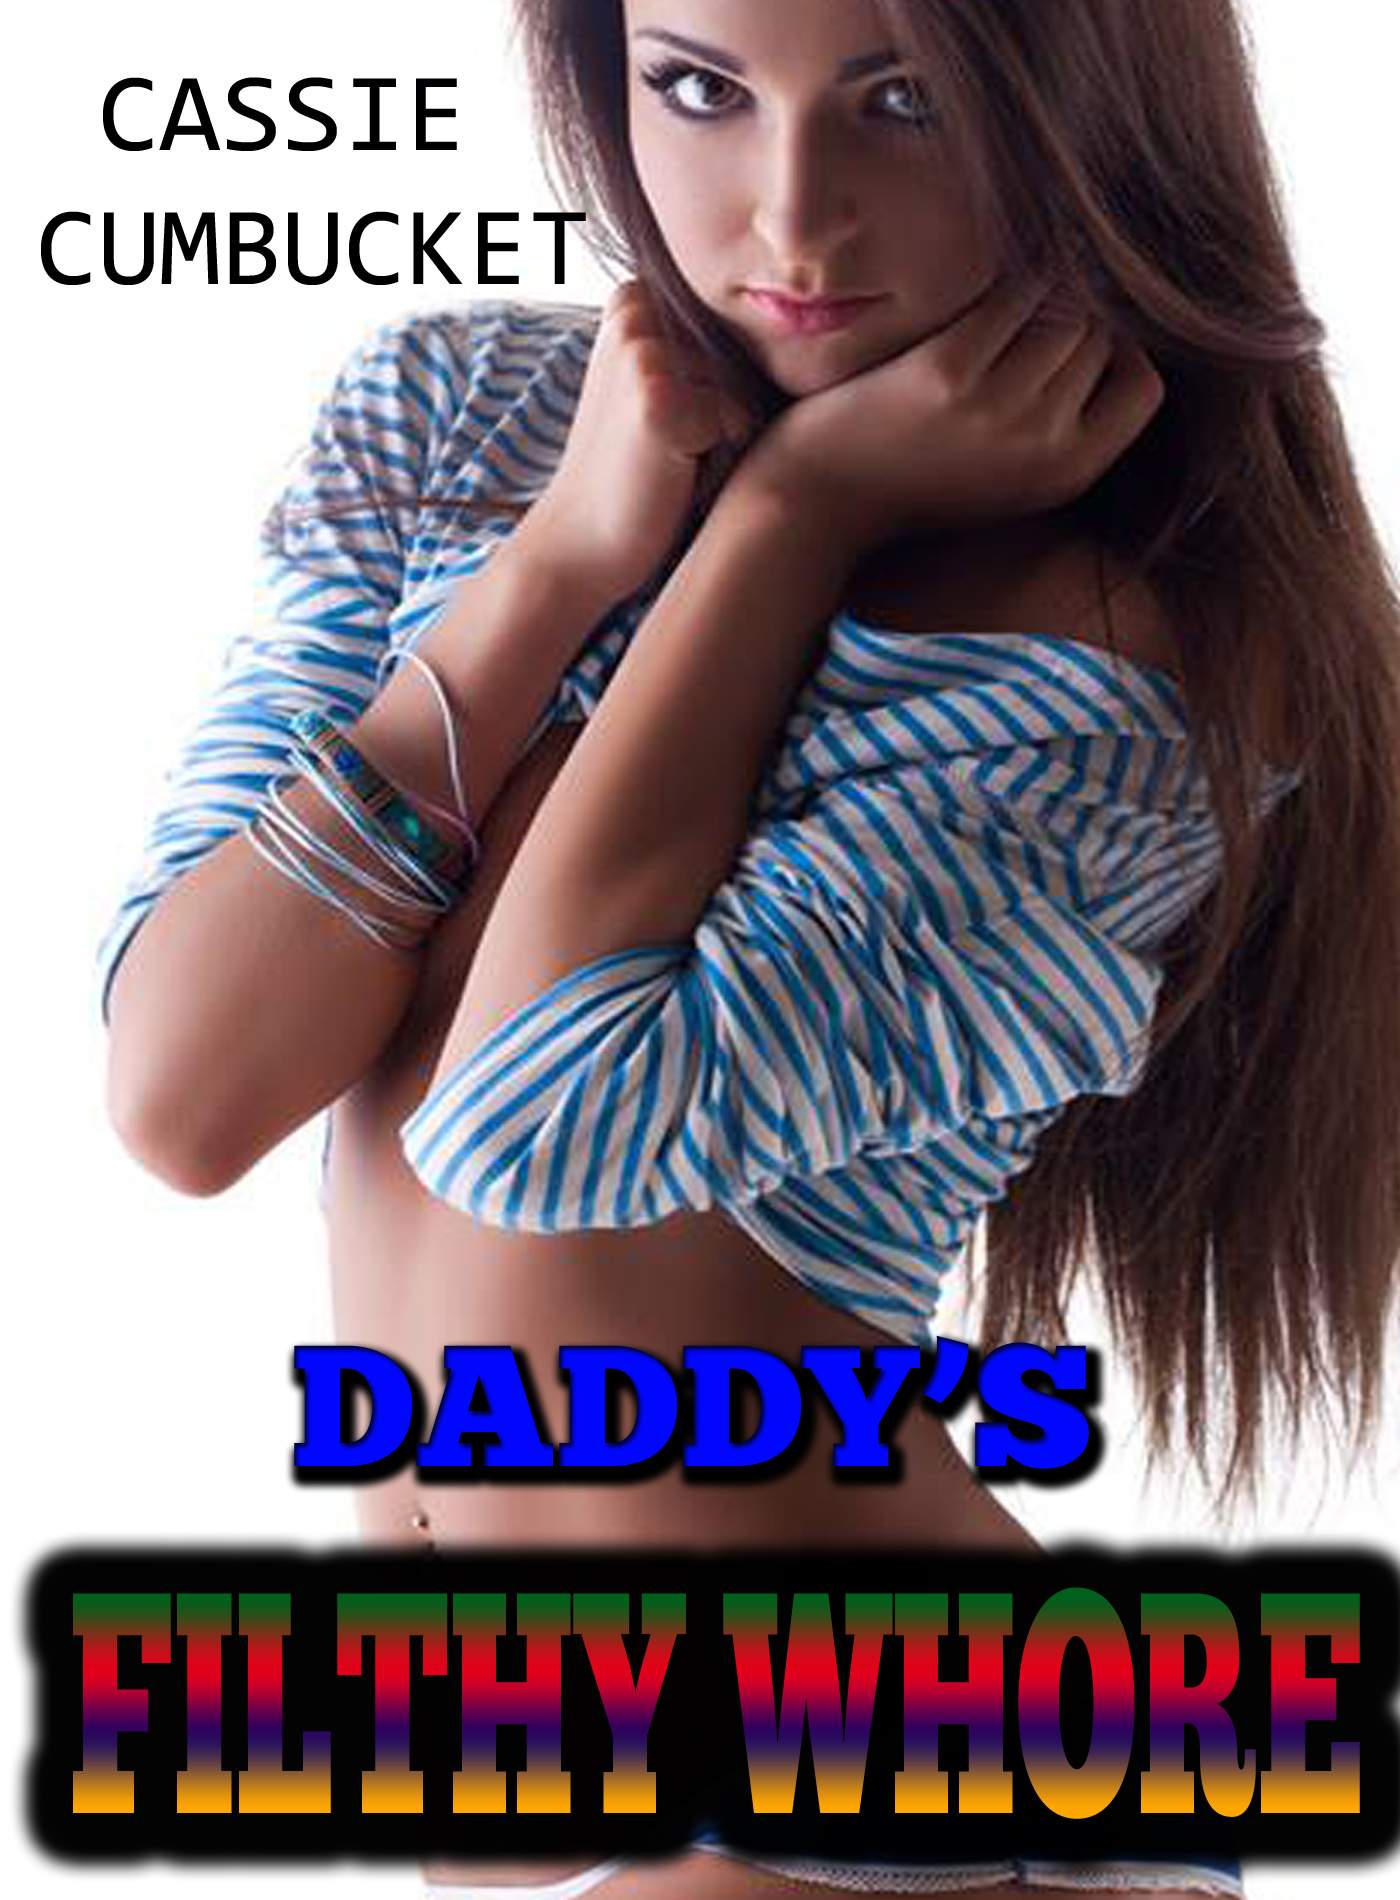 Daddy's Filthy Whore, an Ebook by Cassie Cumbucket